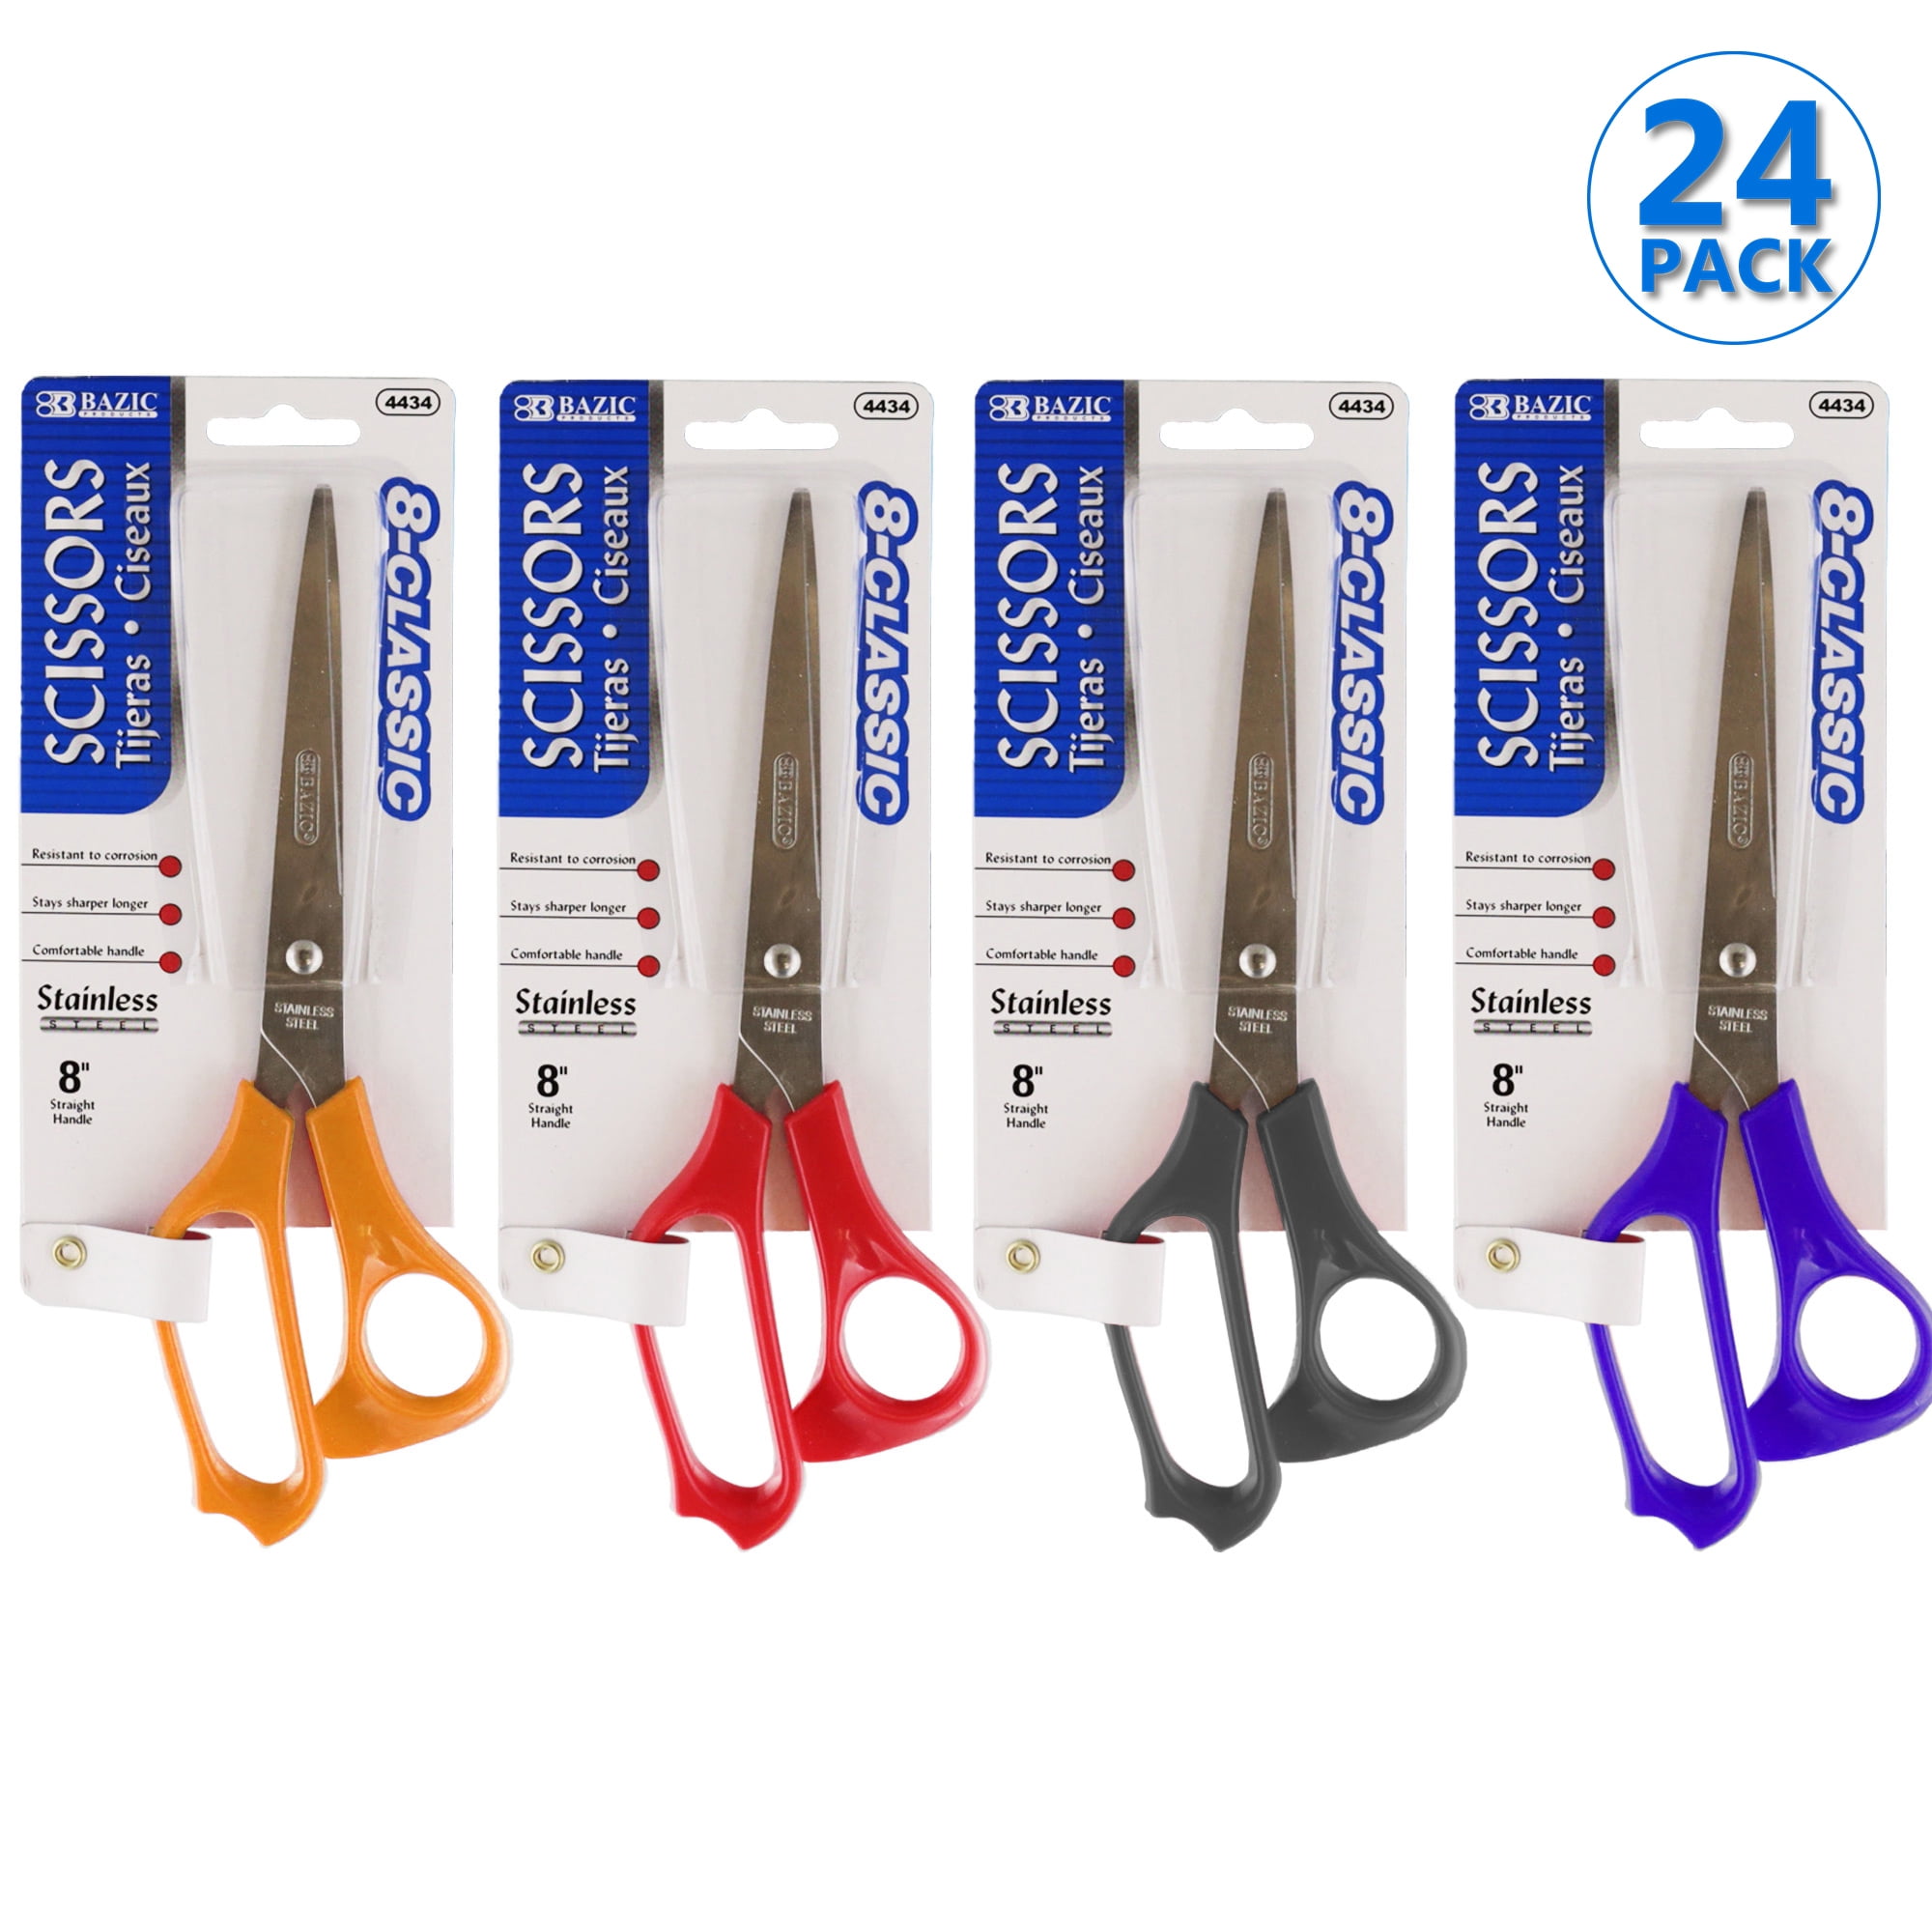 ZekPro 3 Pack Scissors 8 Craft Scissors All Purpose, Heavy Duty Sharp  Blade Shears Sewing Scissor for Office, Fabric and School Supplies Left -  Right